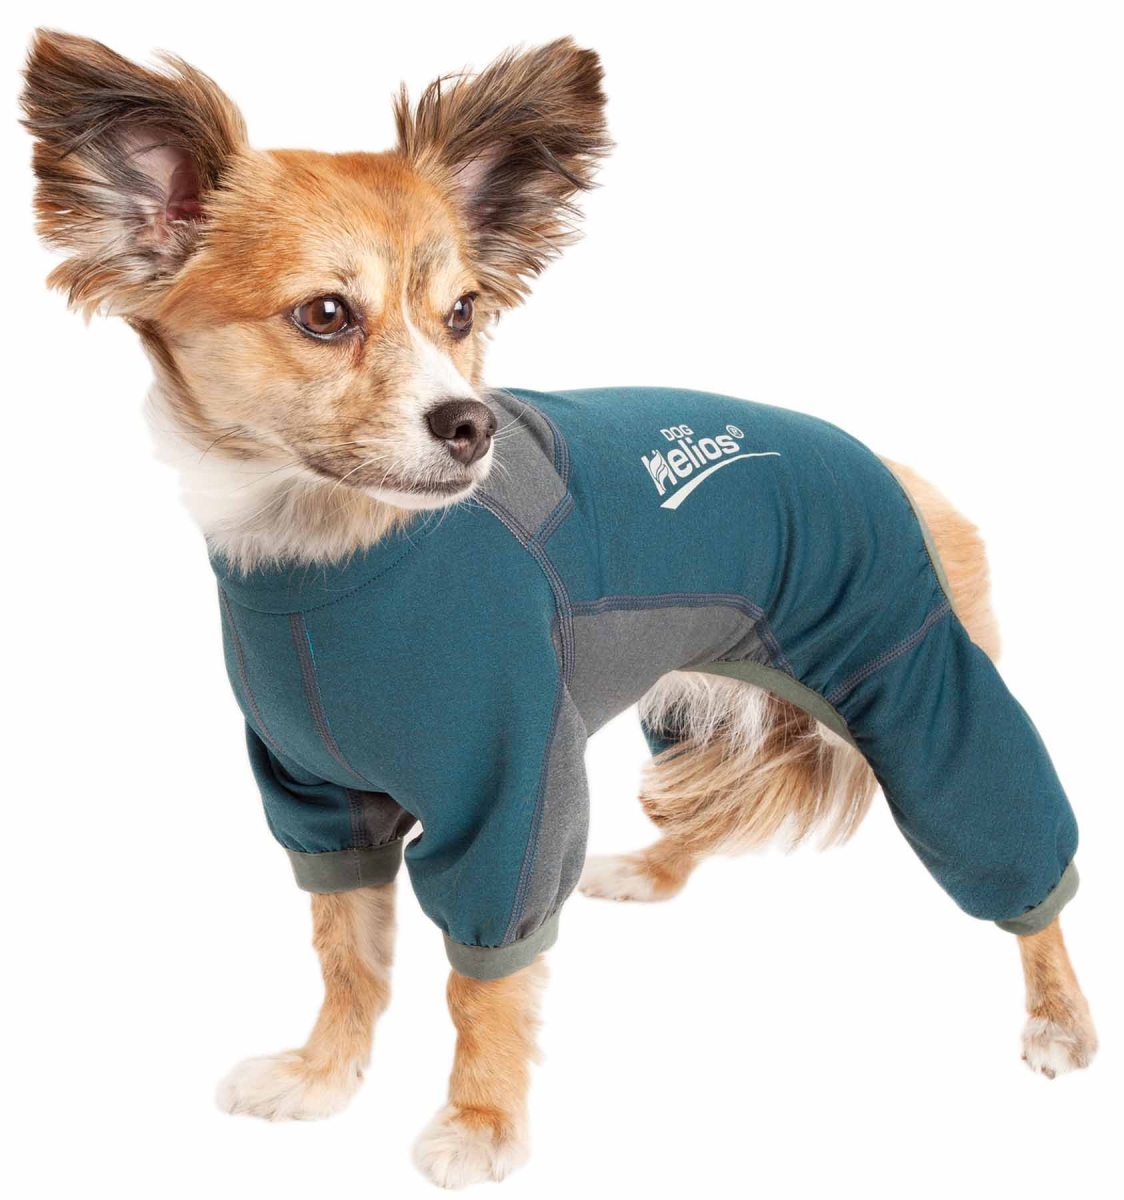 Yghl8bllg Rufflex 4-way-stretch Breathable Full Bodied Performance Dog Warmup Track Suit - Blue & Grey, Large